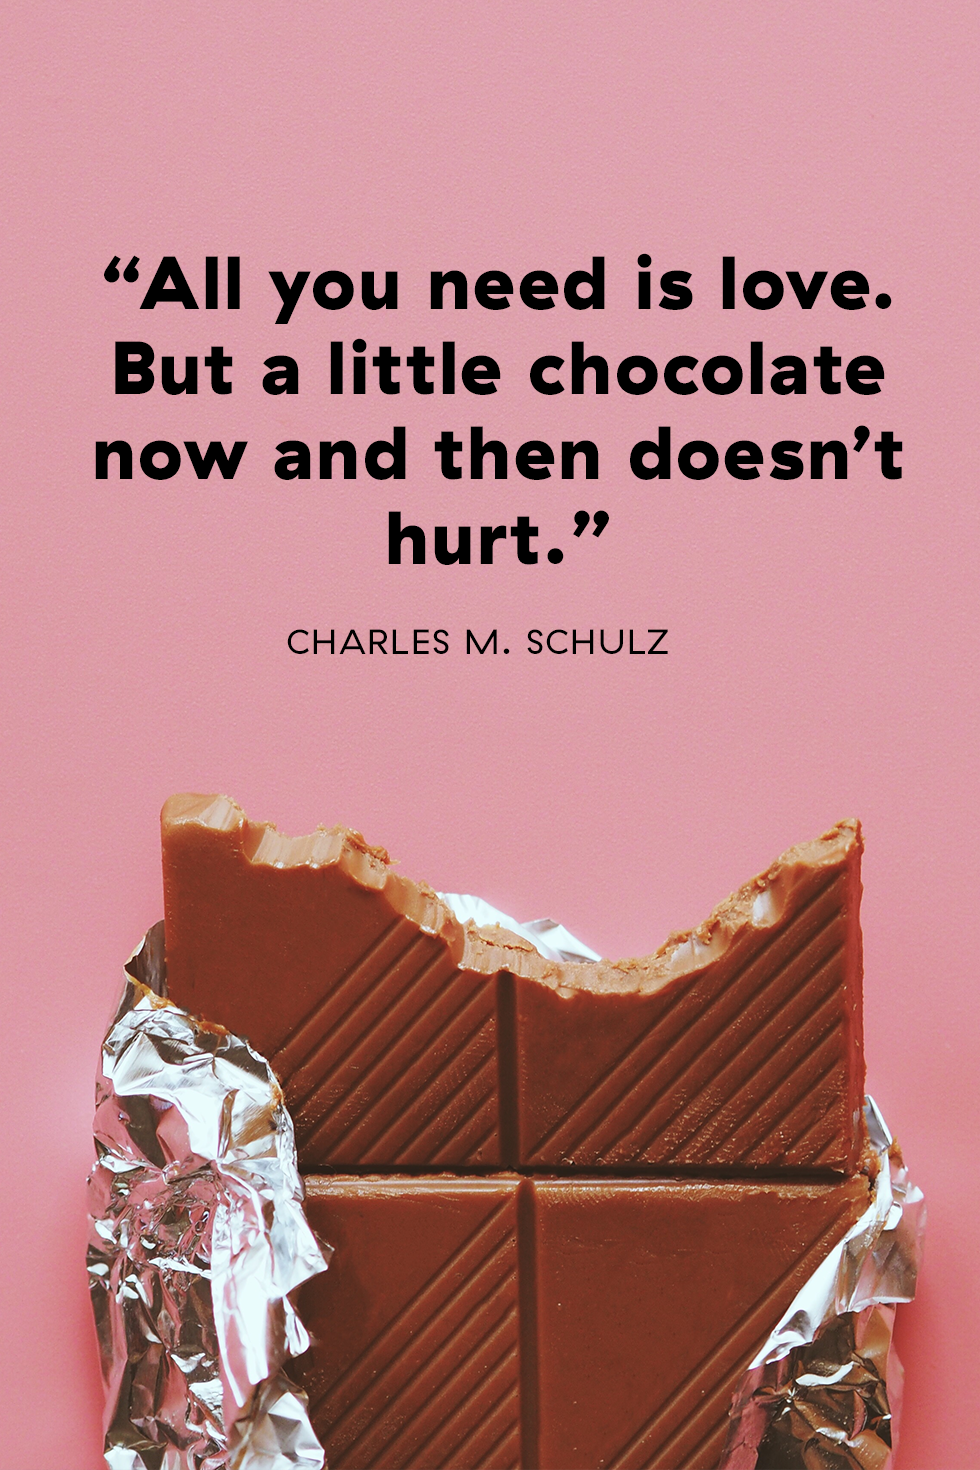 The All-Time Greatest Quotes About Dessert - Dessert Quotes